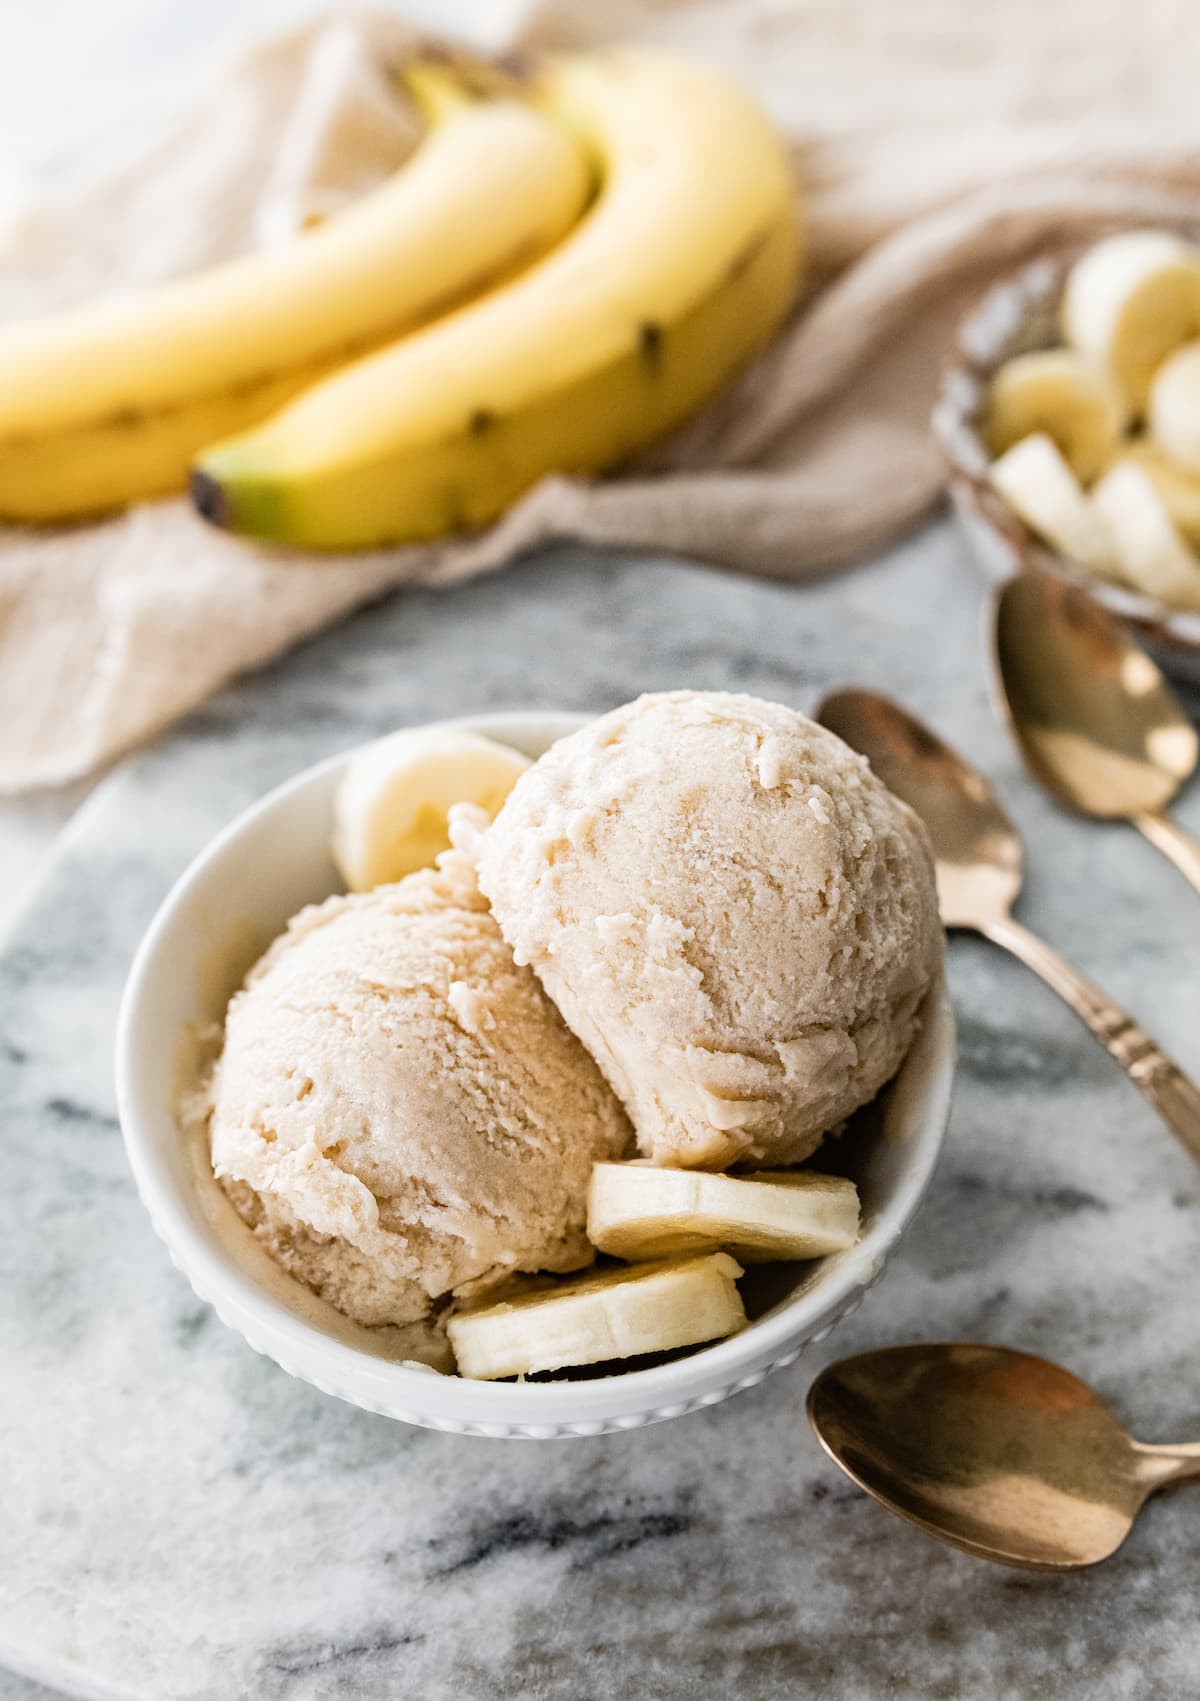 Bowl with two scoops of banana frozen yogurt served with fresh banana slices.